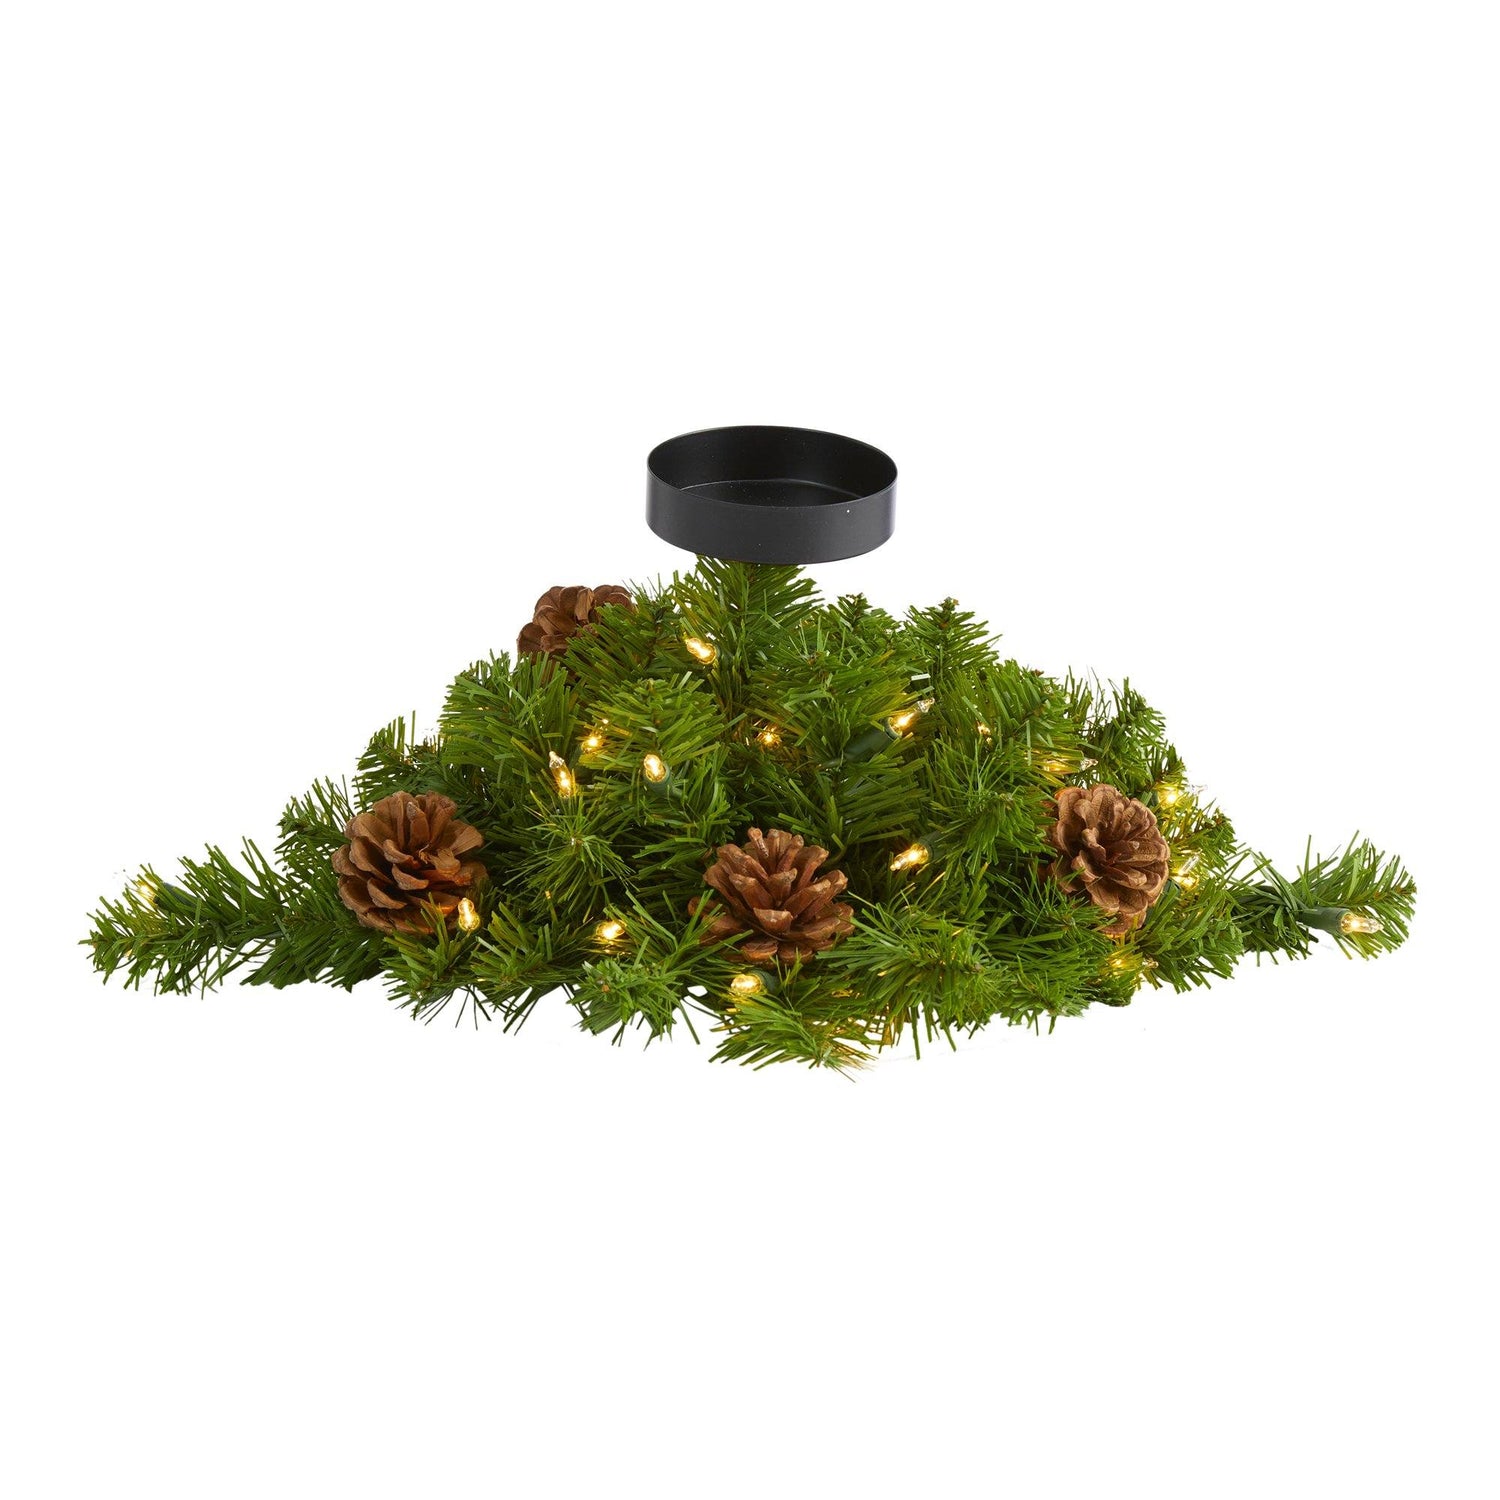 16” Christmas Pine Candelabrum with 35 Lights and Pine Cones